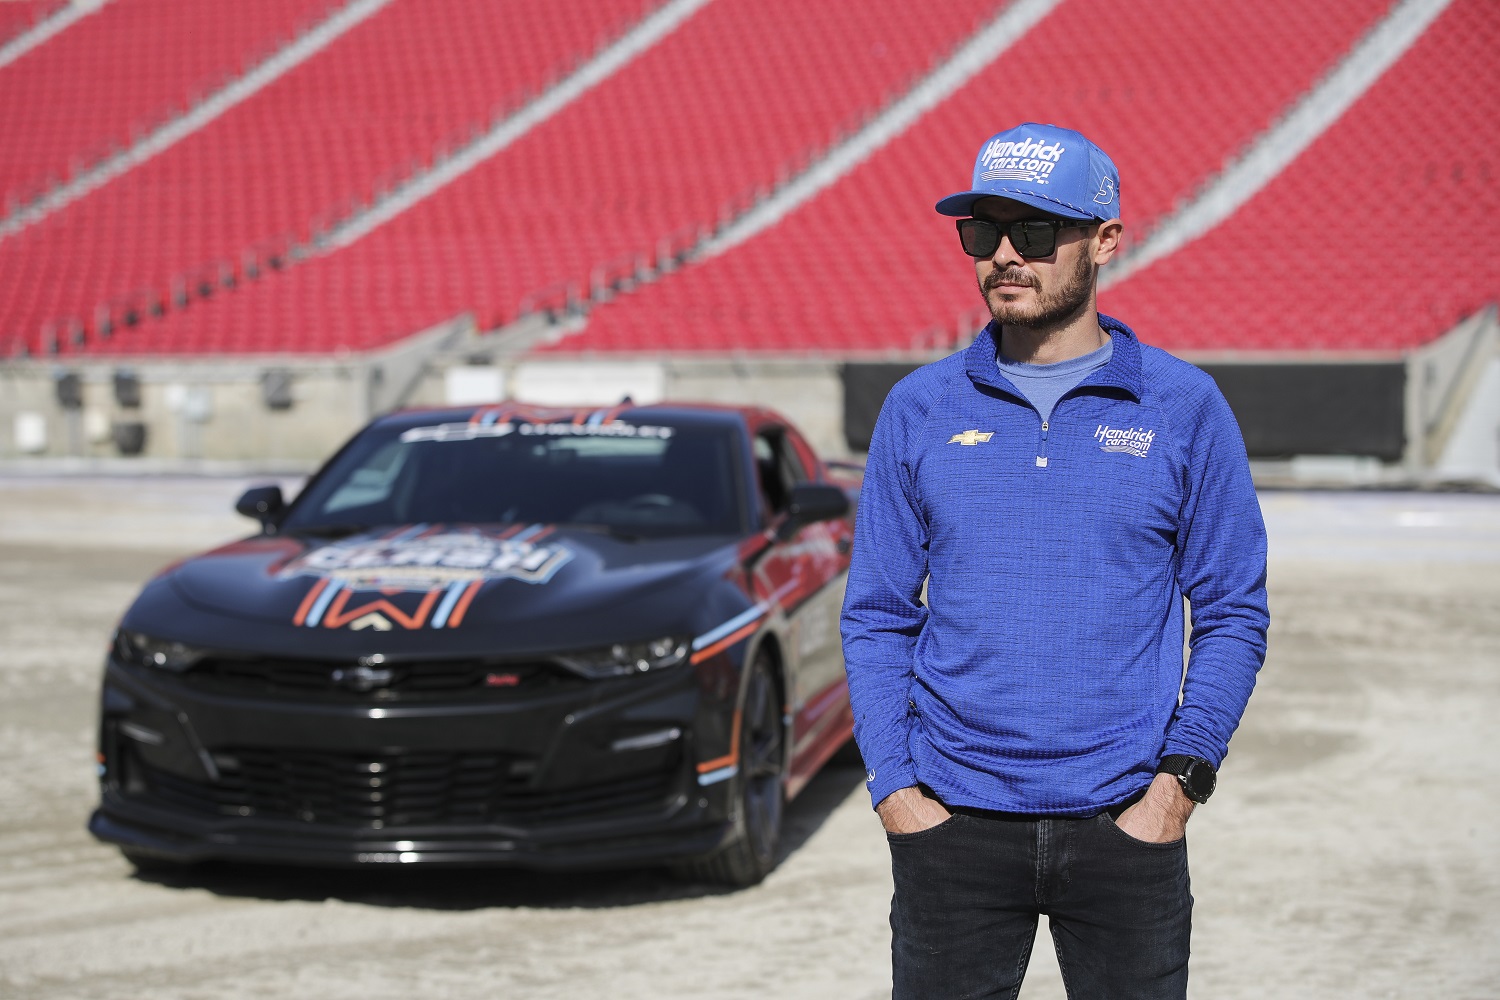 Kyle Larson arrives for the groundbreaking ceremony ahead of the Busch Light Clash at The Los Angeles Memorial Coliseum on Dec. 15, 2022.